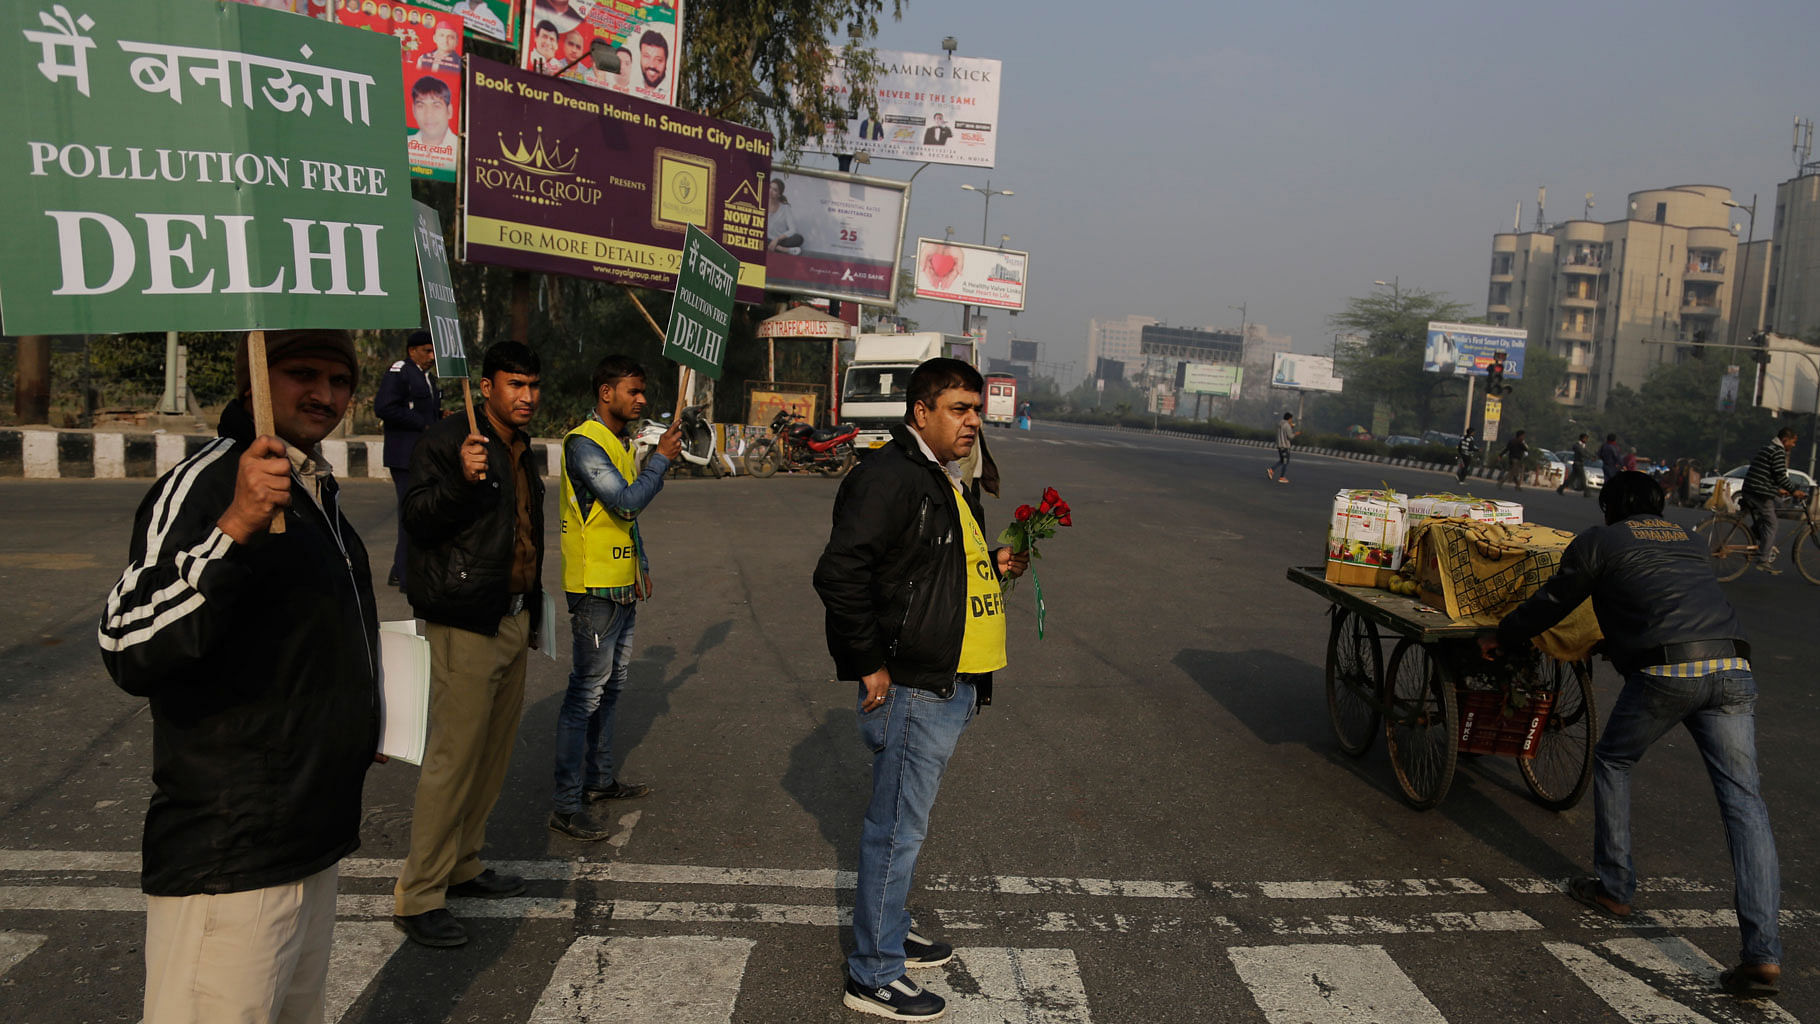 

Volunteers supporting the odd-even formula in New Delhi on January 1, 2016. (Photo: AP)